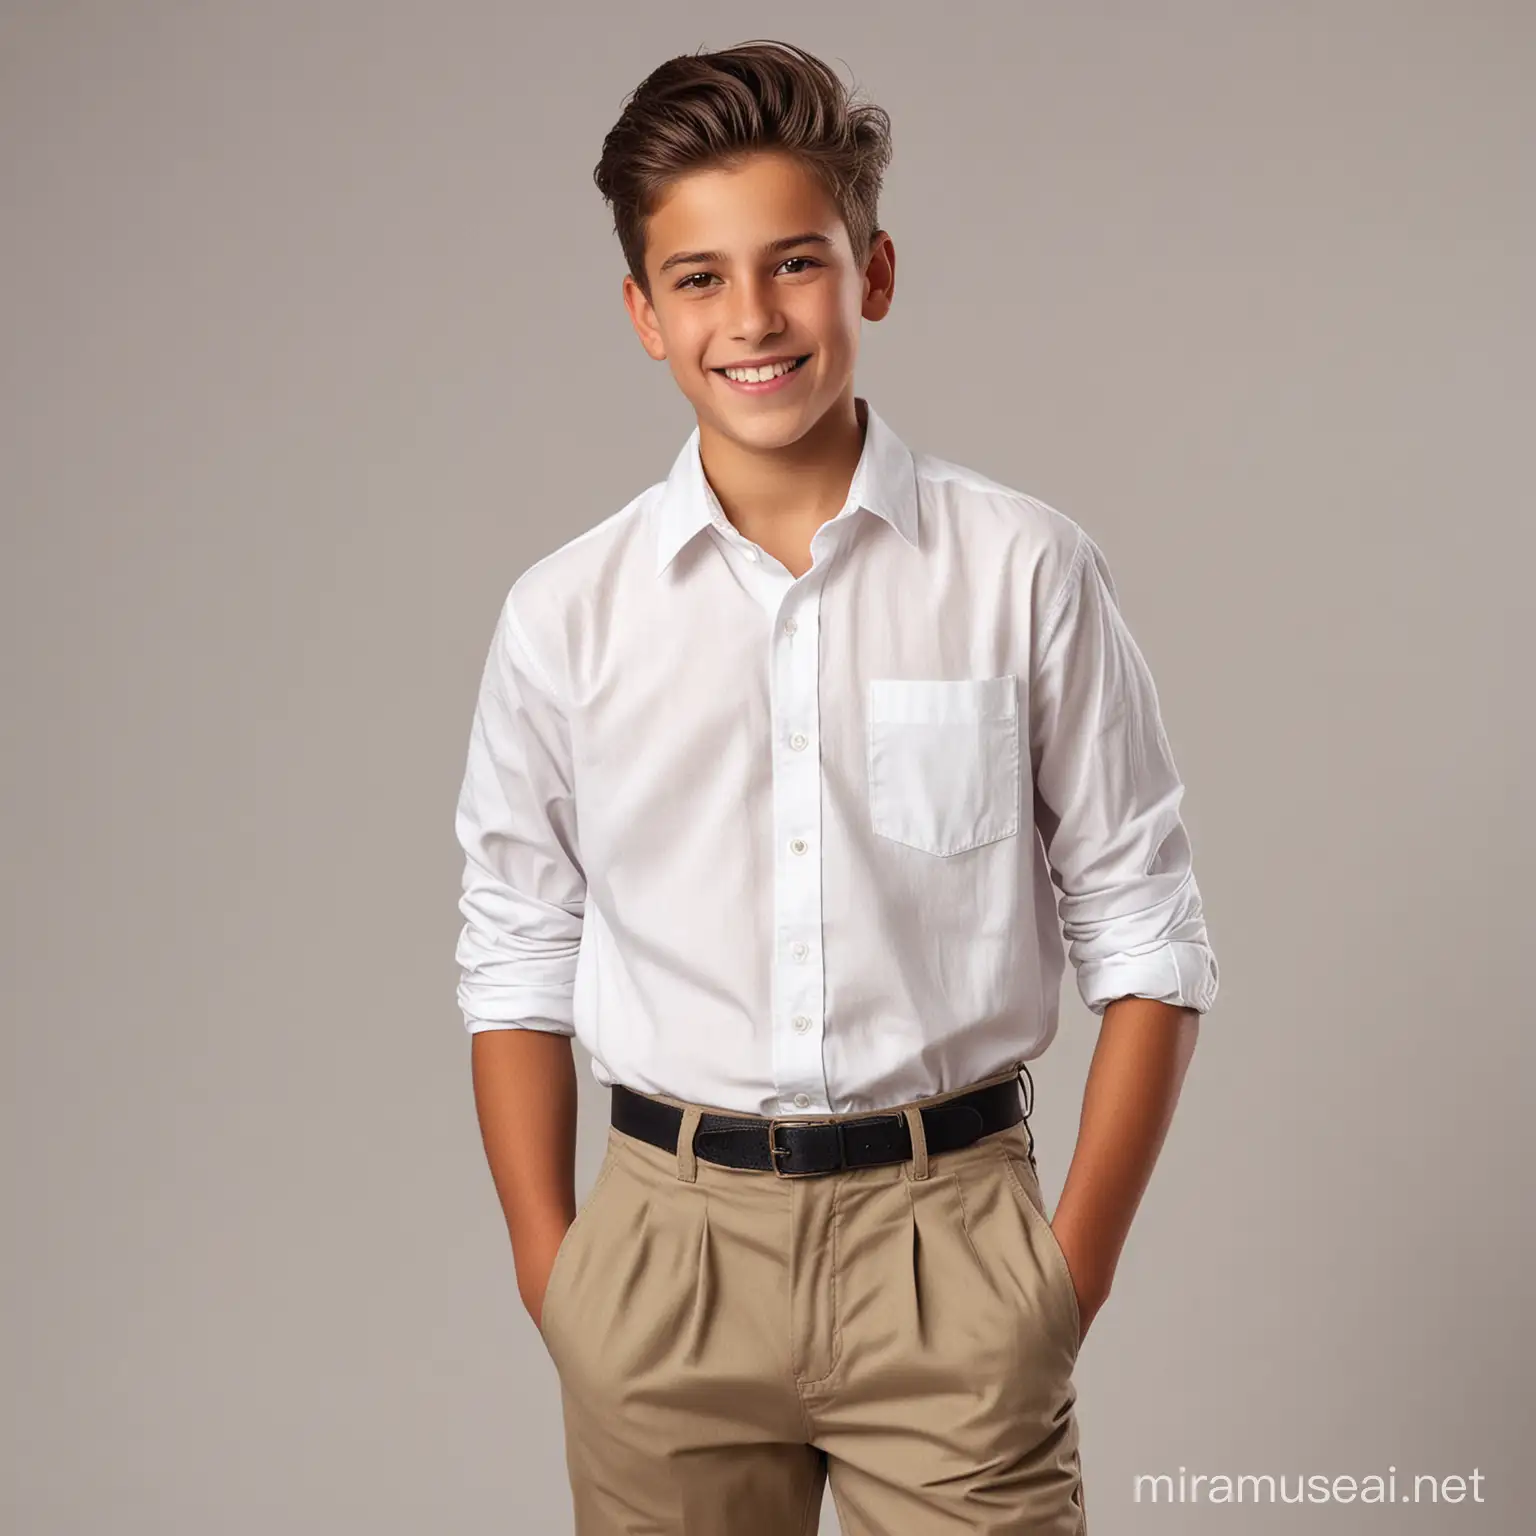 Cheerful 14YearOld Boy Smiling Positively in Stylish Attire